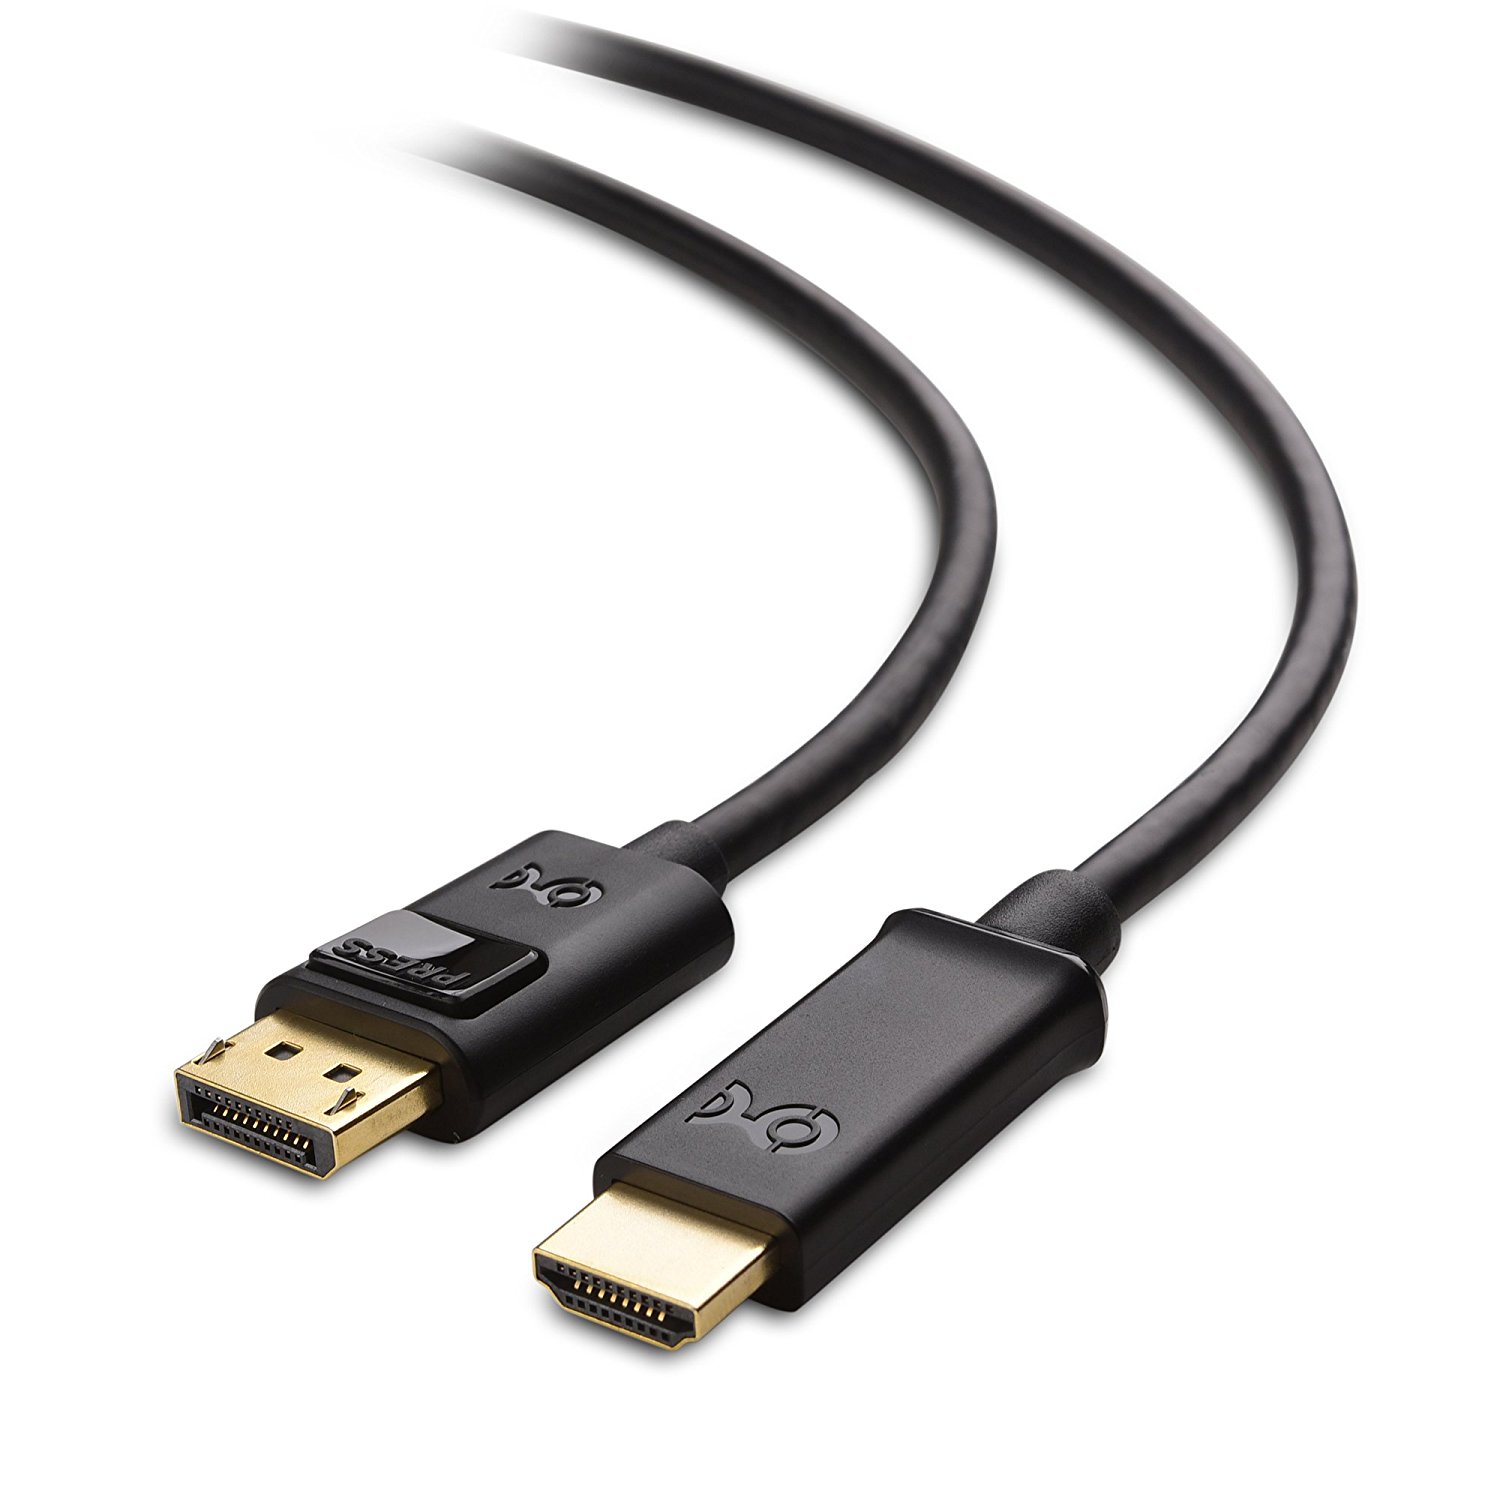 Amazon.com: Cable Matters Unidirectional DisplayPort to HDMI Cable ...